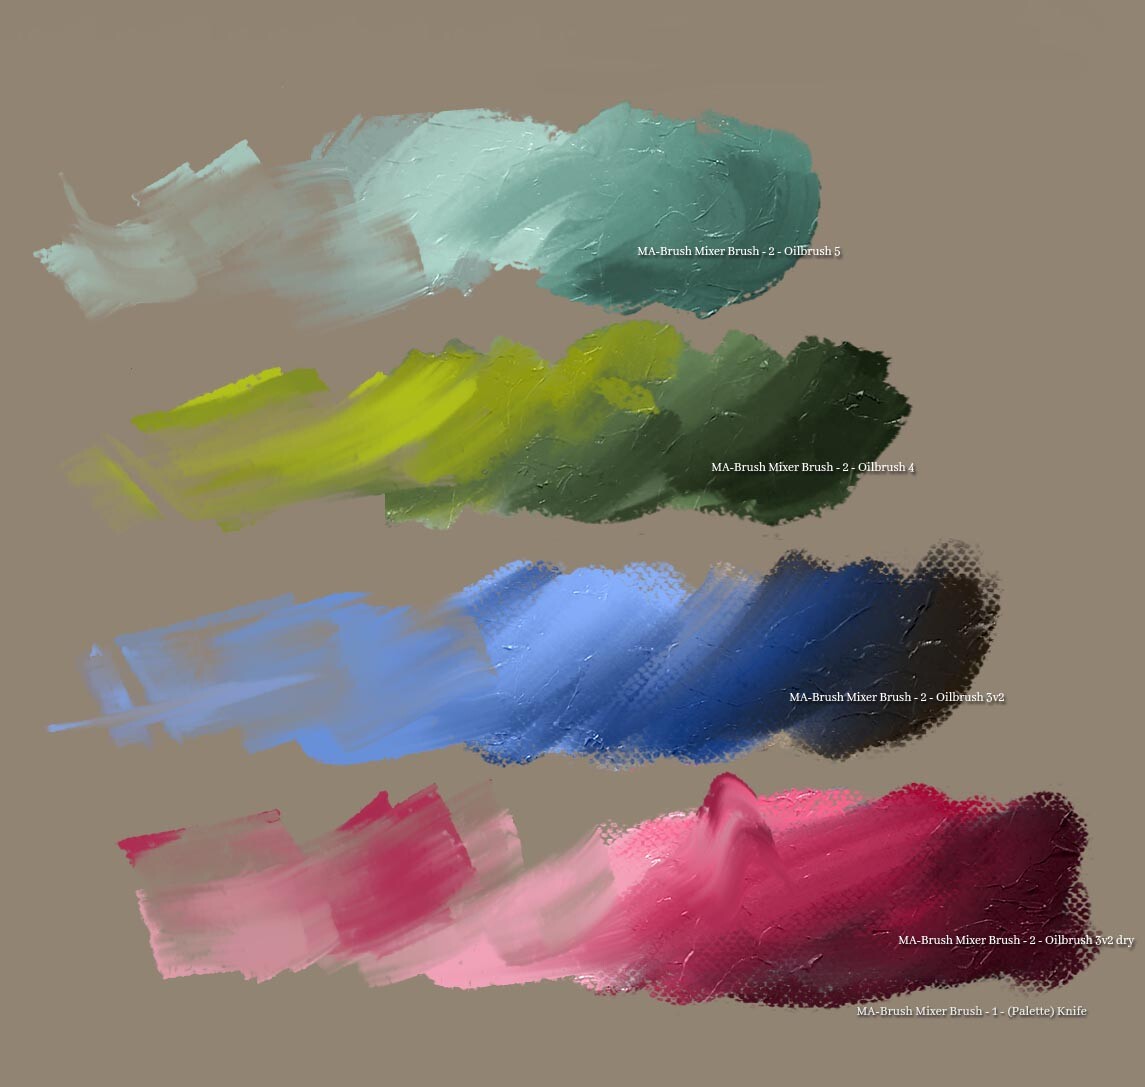 ArtStation - Photoshop CC Oil Painting Brushes Pack by Sundeepartist